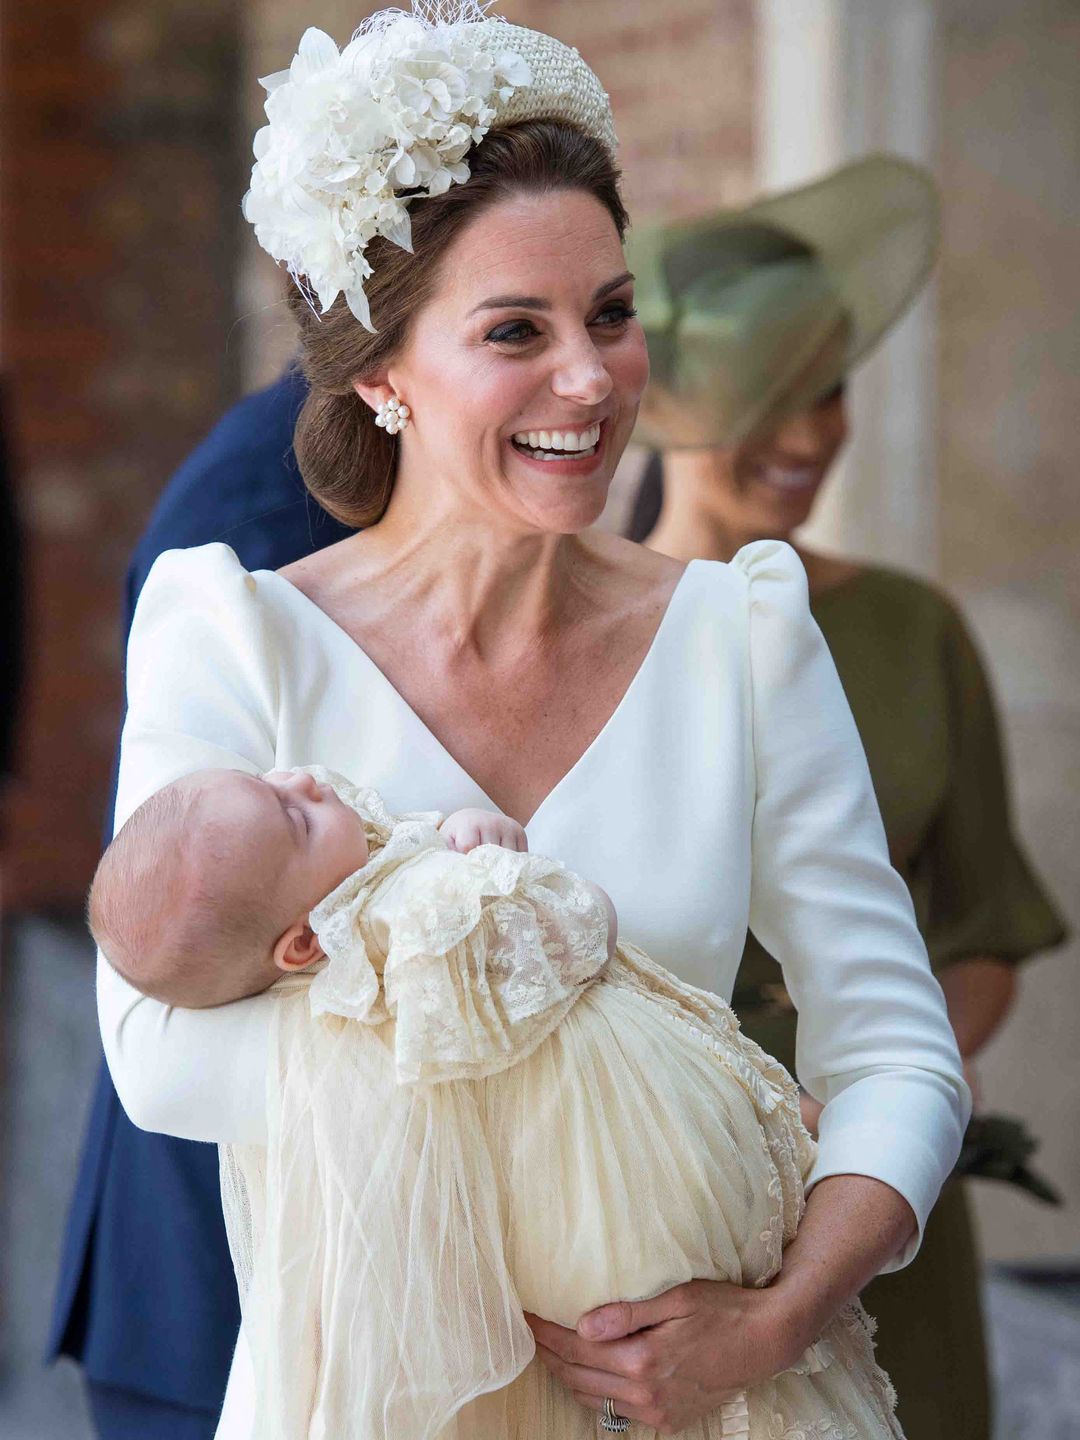 Britain's Catherine, Duchess of Cambridge holds Britain's Prince Louis of Cambridge on their arrival for his christening service wearing Alexander McQueen dress